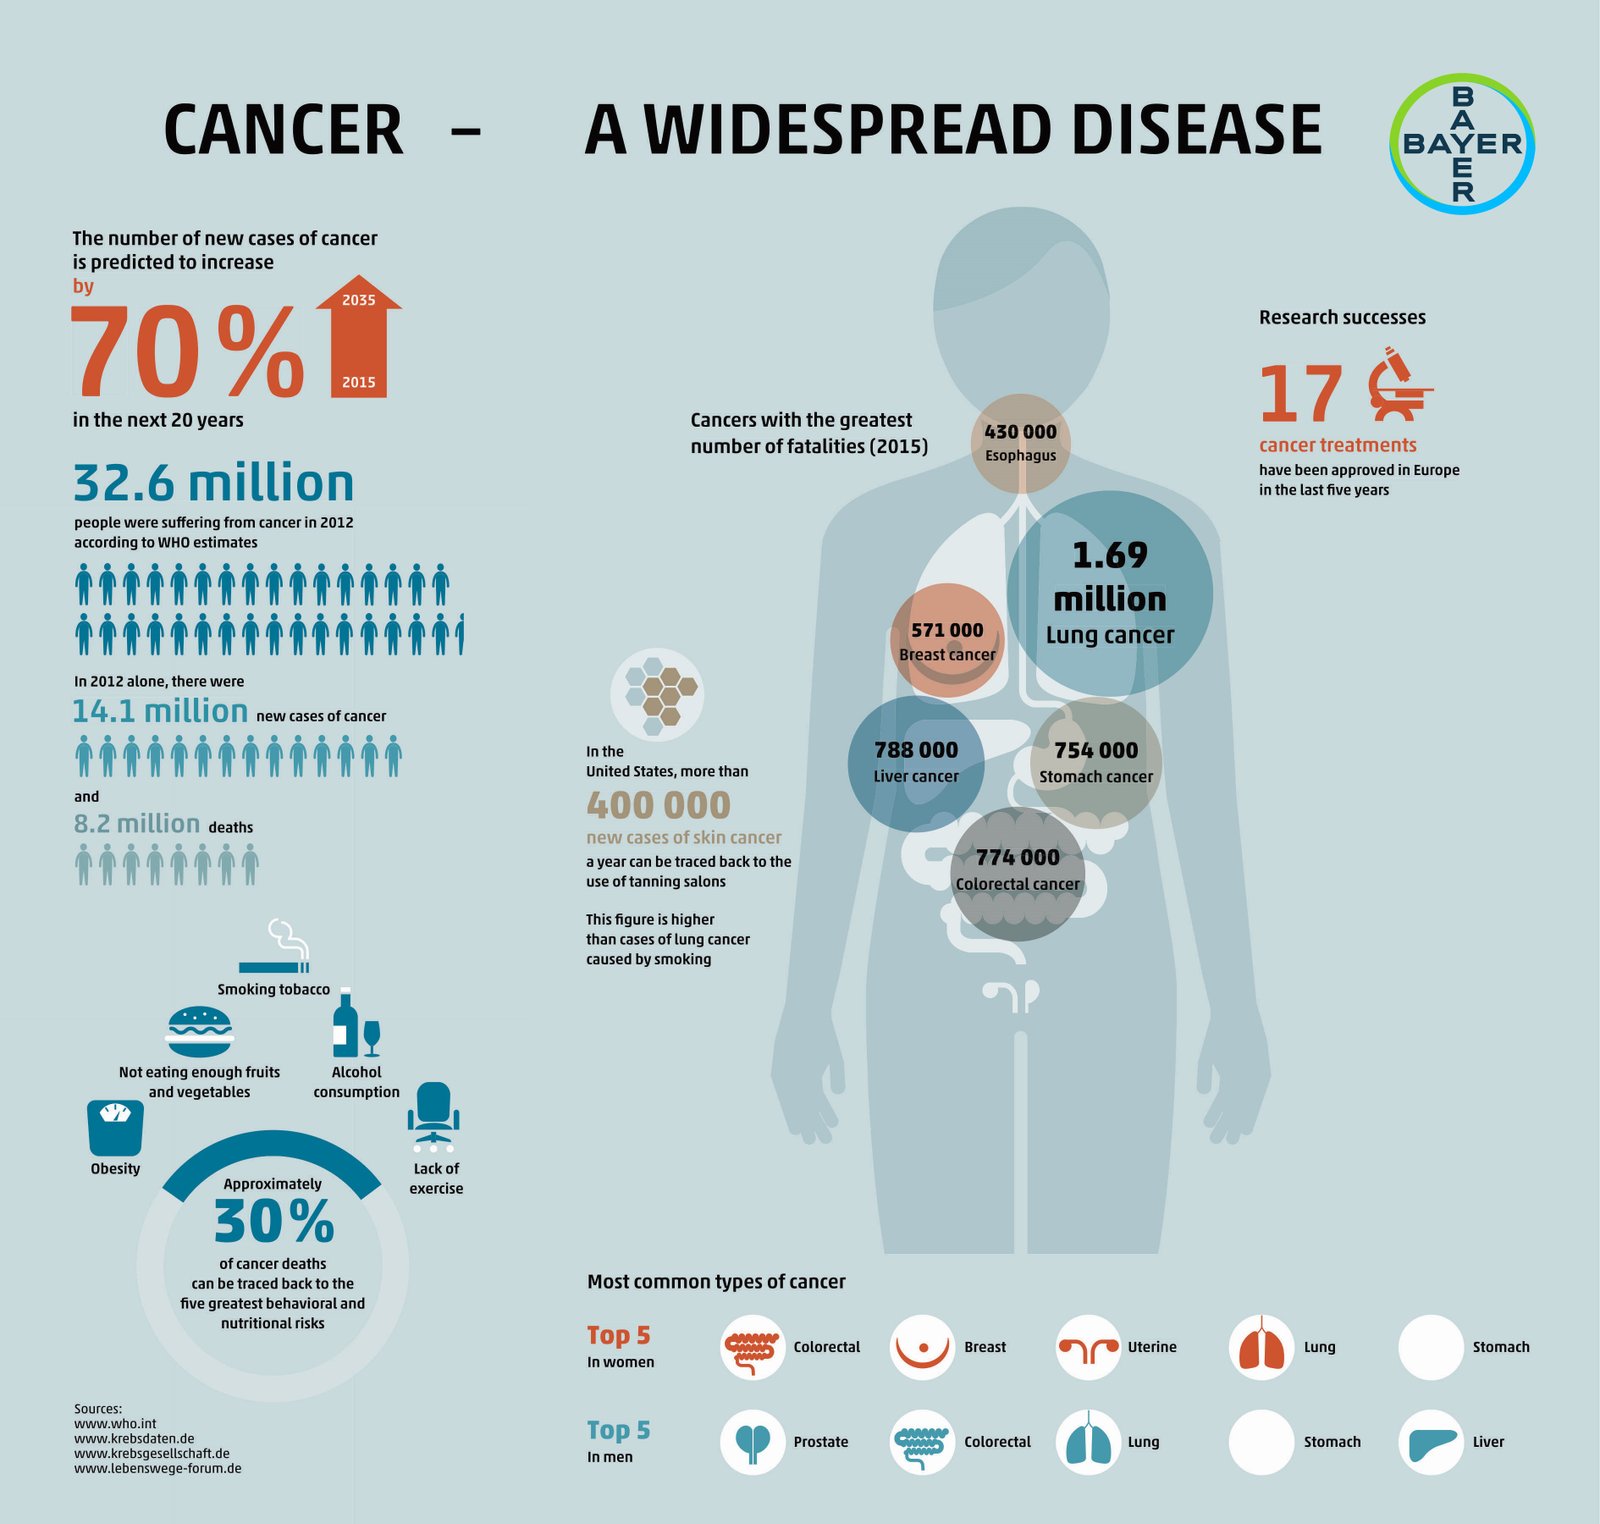 Image Credit: Infographic on Cancer by Bayer